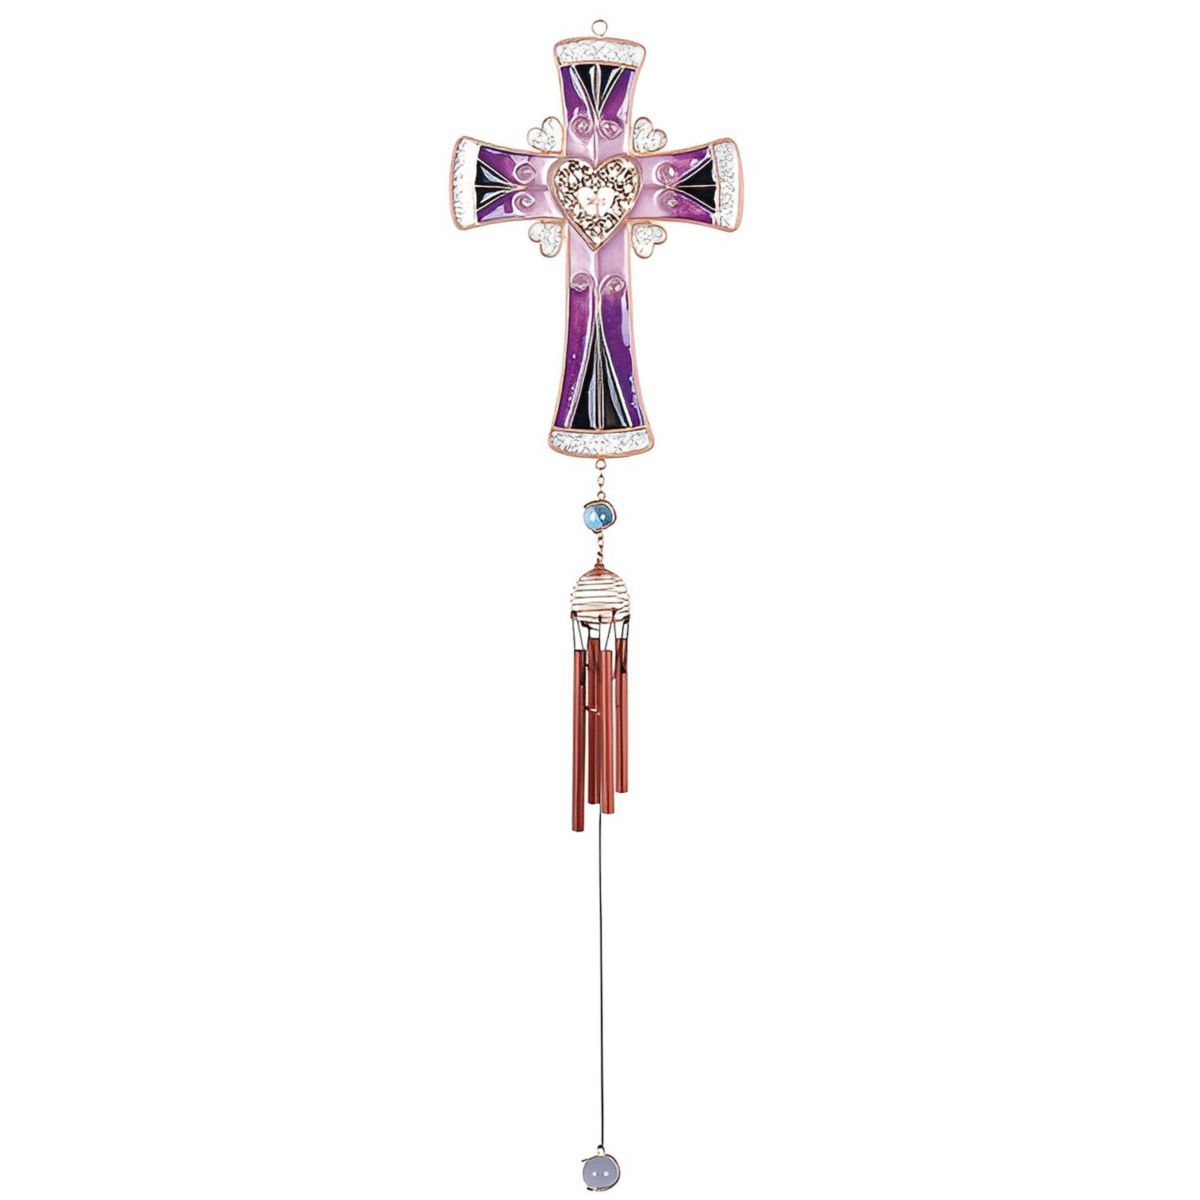 FC Design 30" Long Purple Cross Wind Chime with Copper Gem Perfect Gifts for Holiday F.C Design